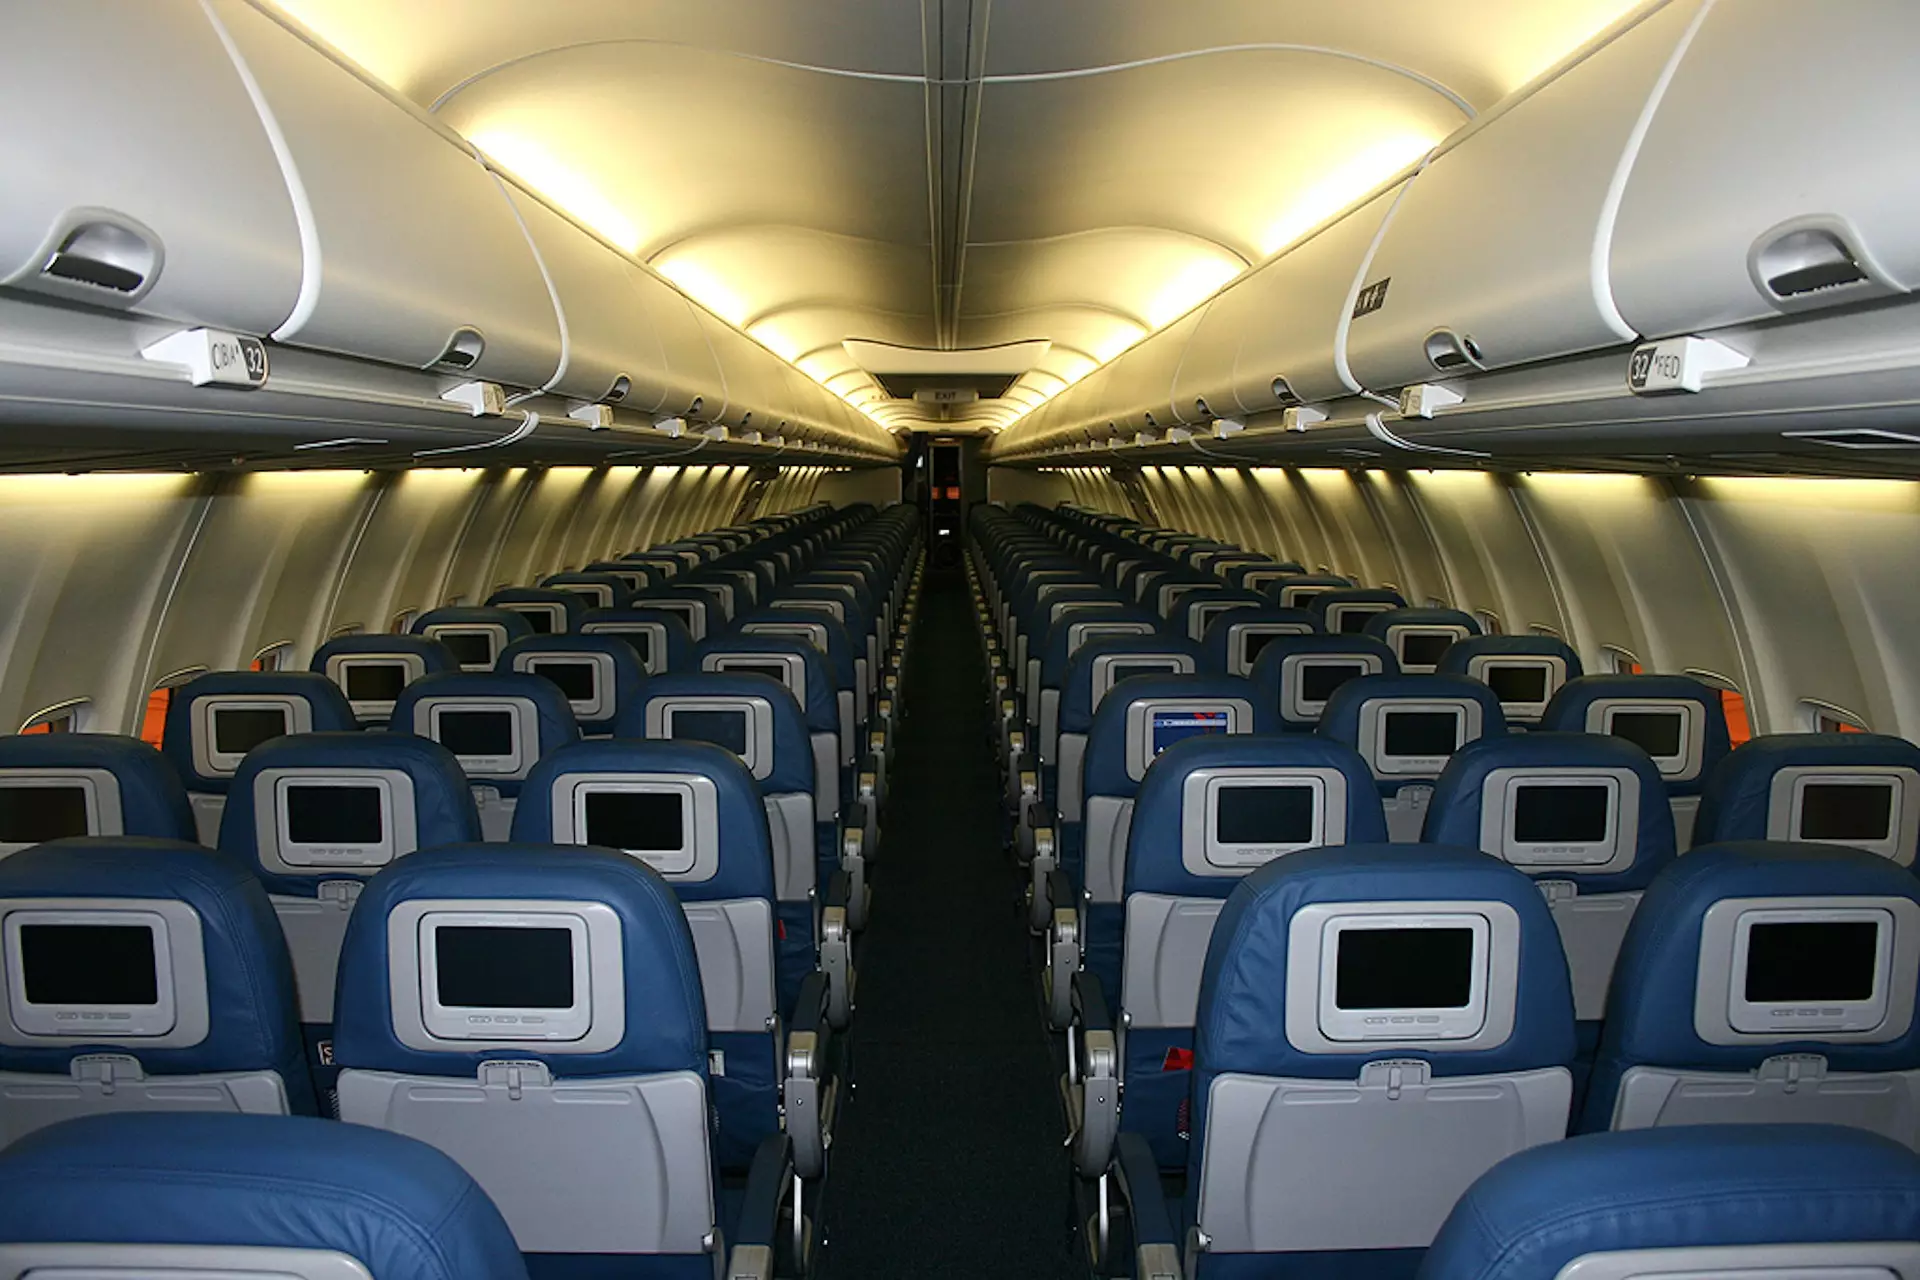 ​Pilot Reveals The Reason Why Lights Are Dimmed On Planes Before Take-Off